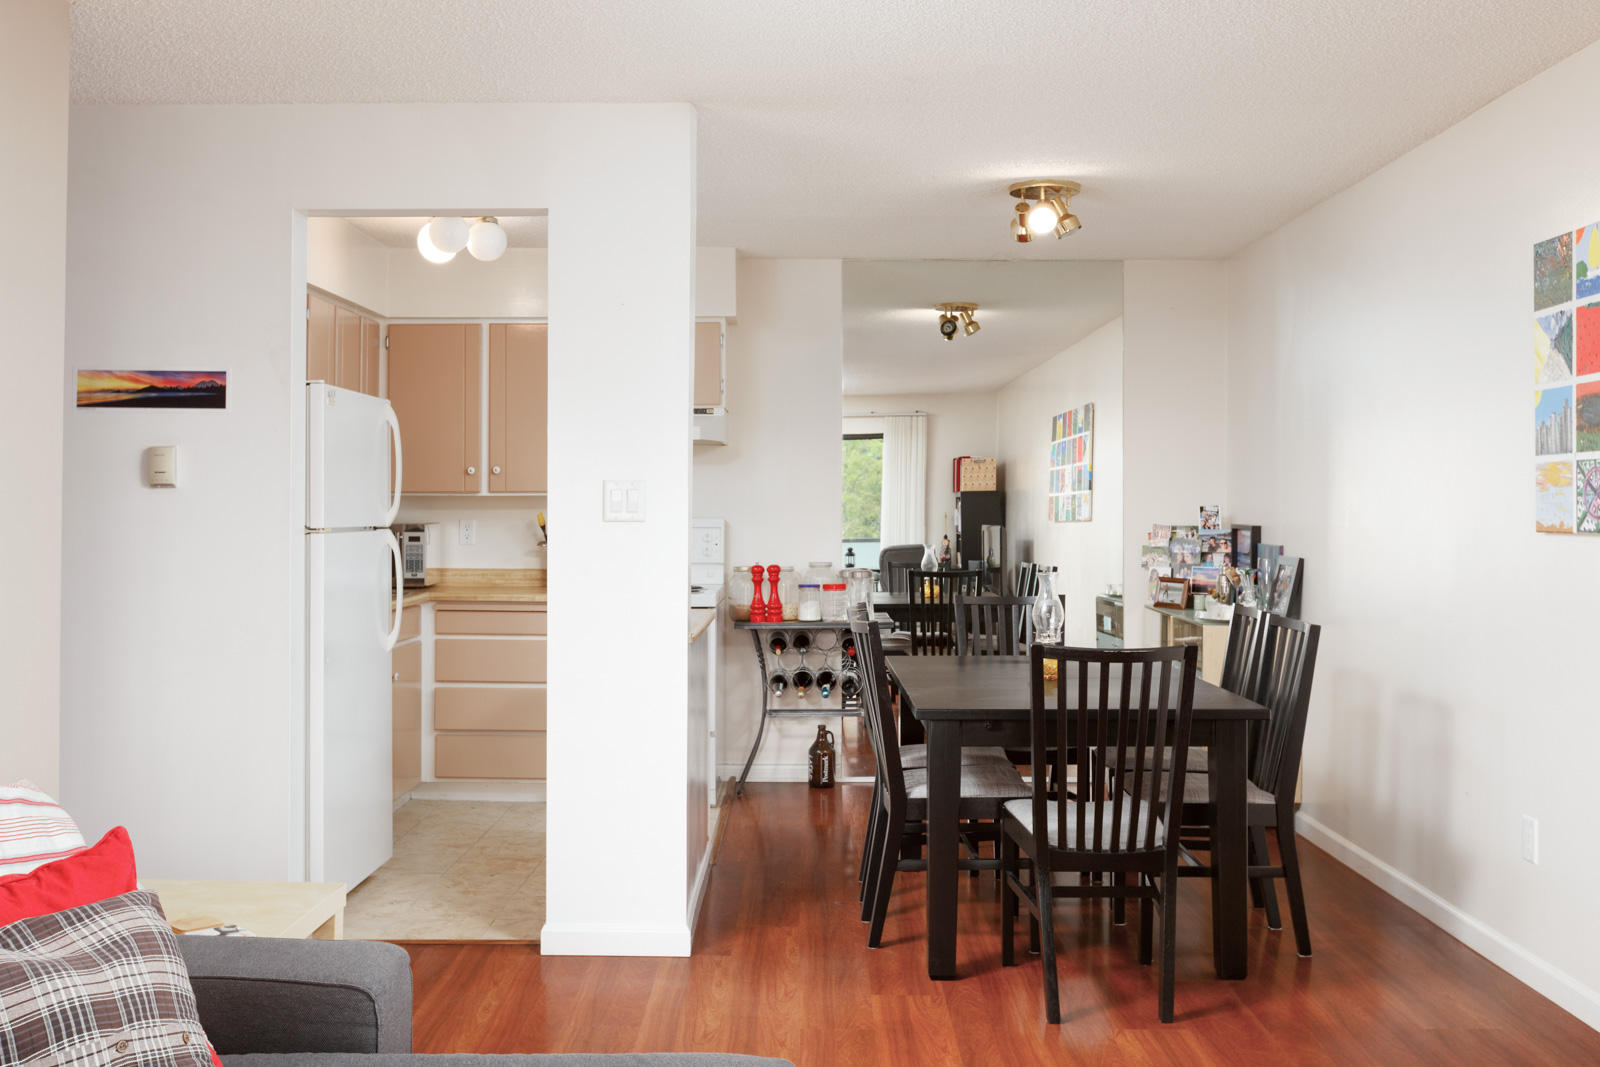 Kitchen and dining area inside Vancouver rental condo.